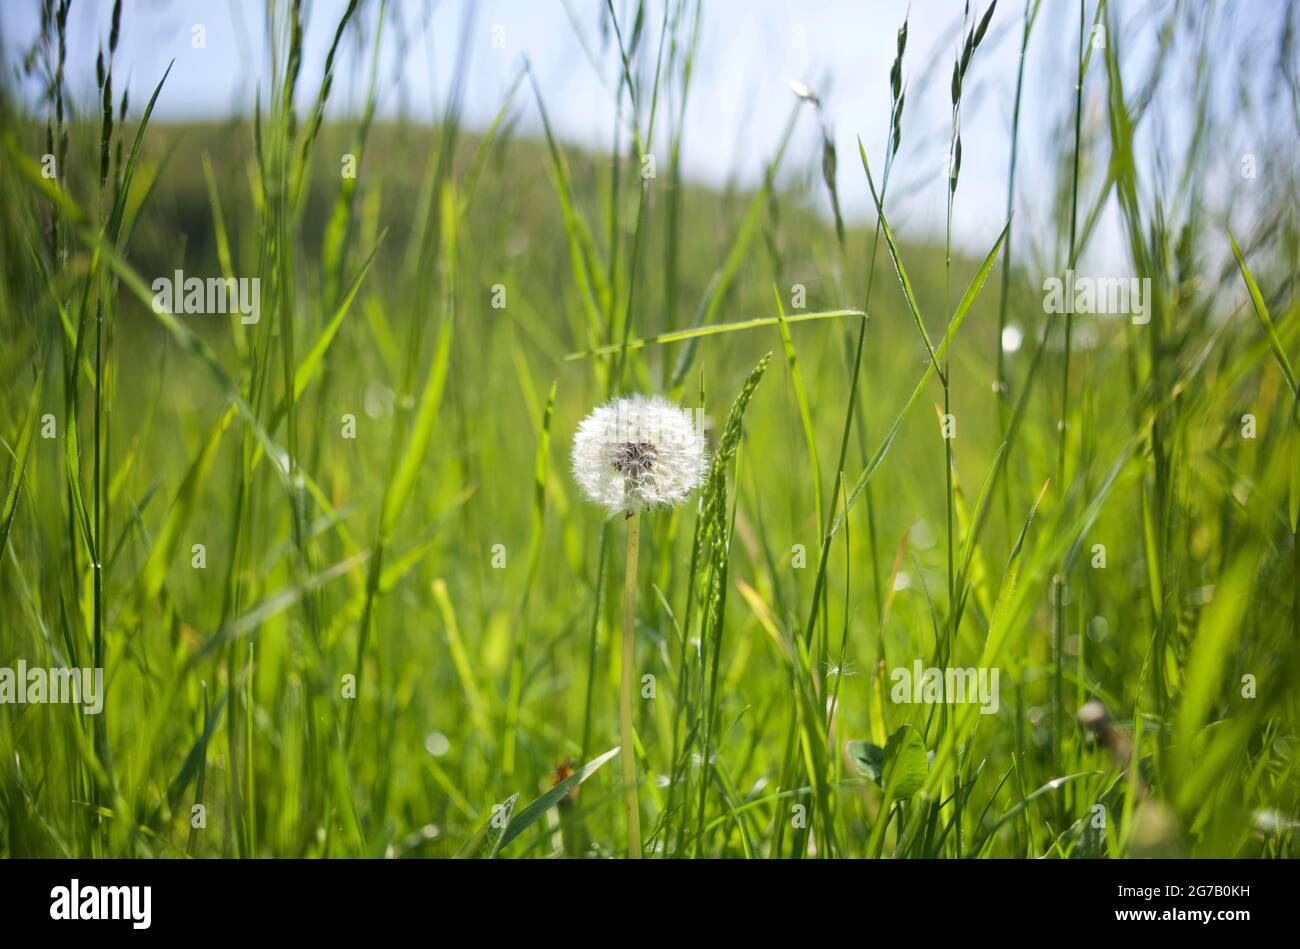 Dandelion clock full of seeds in the Sussex countryside, England, United Kingdom. Taraxacum officinale, the dandelion or common dandelion, is a flowering herbaceous perennial plant of the dandelion genus in the family Asteraceae Stock Photo